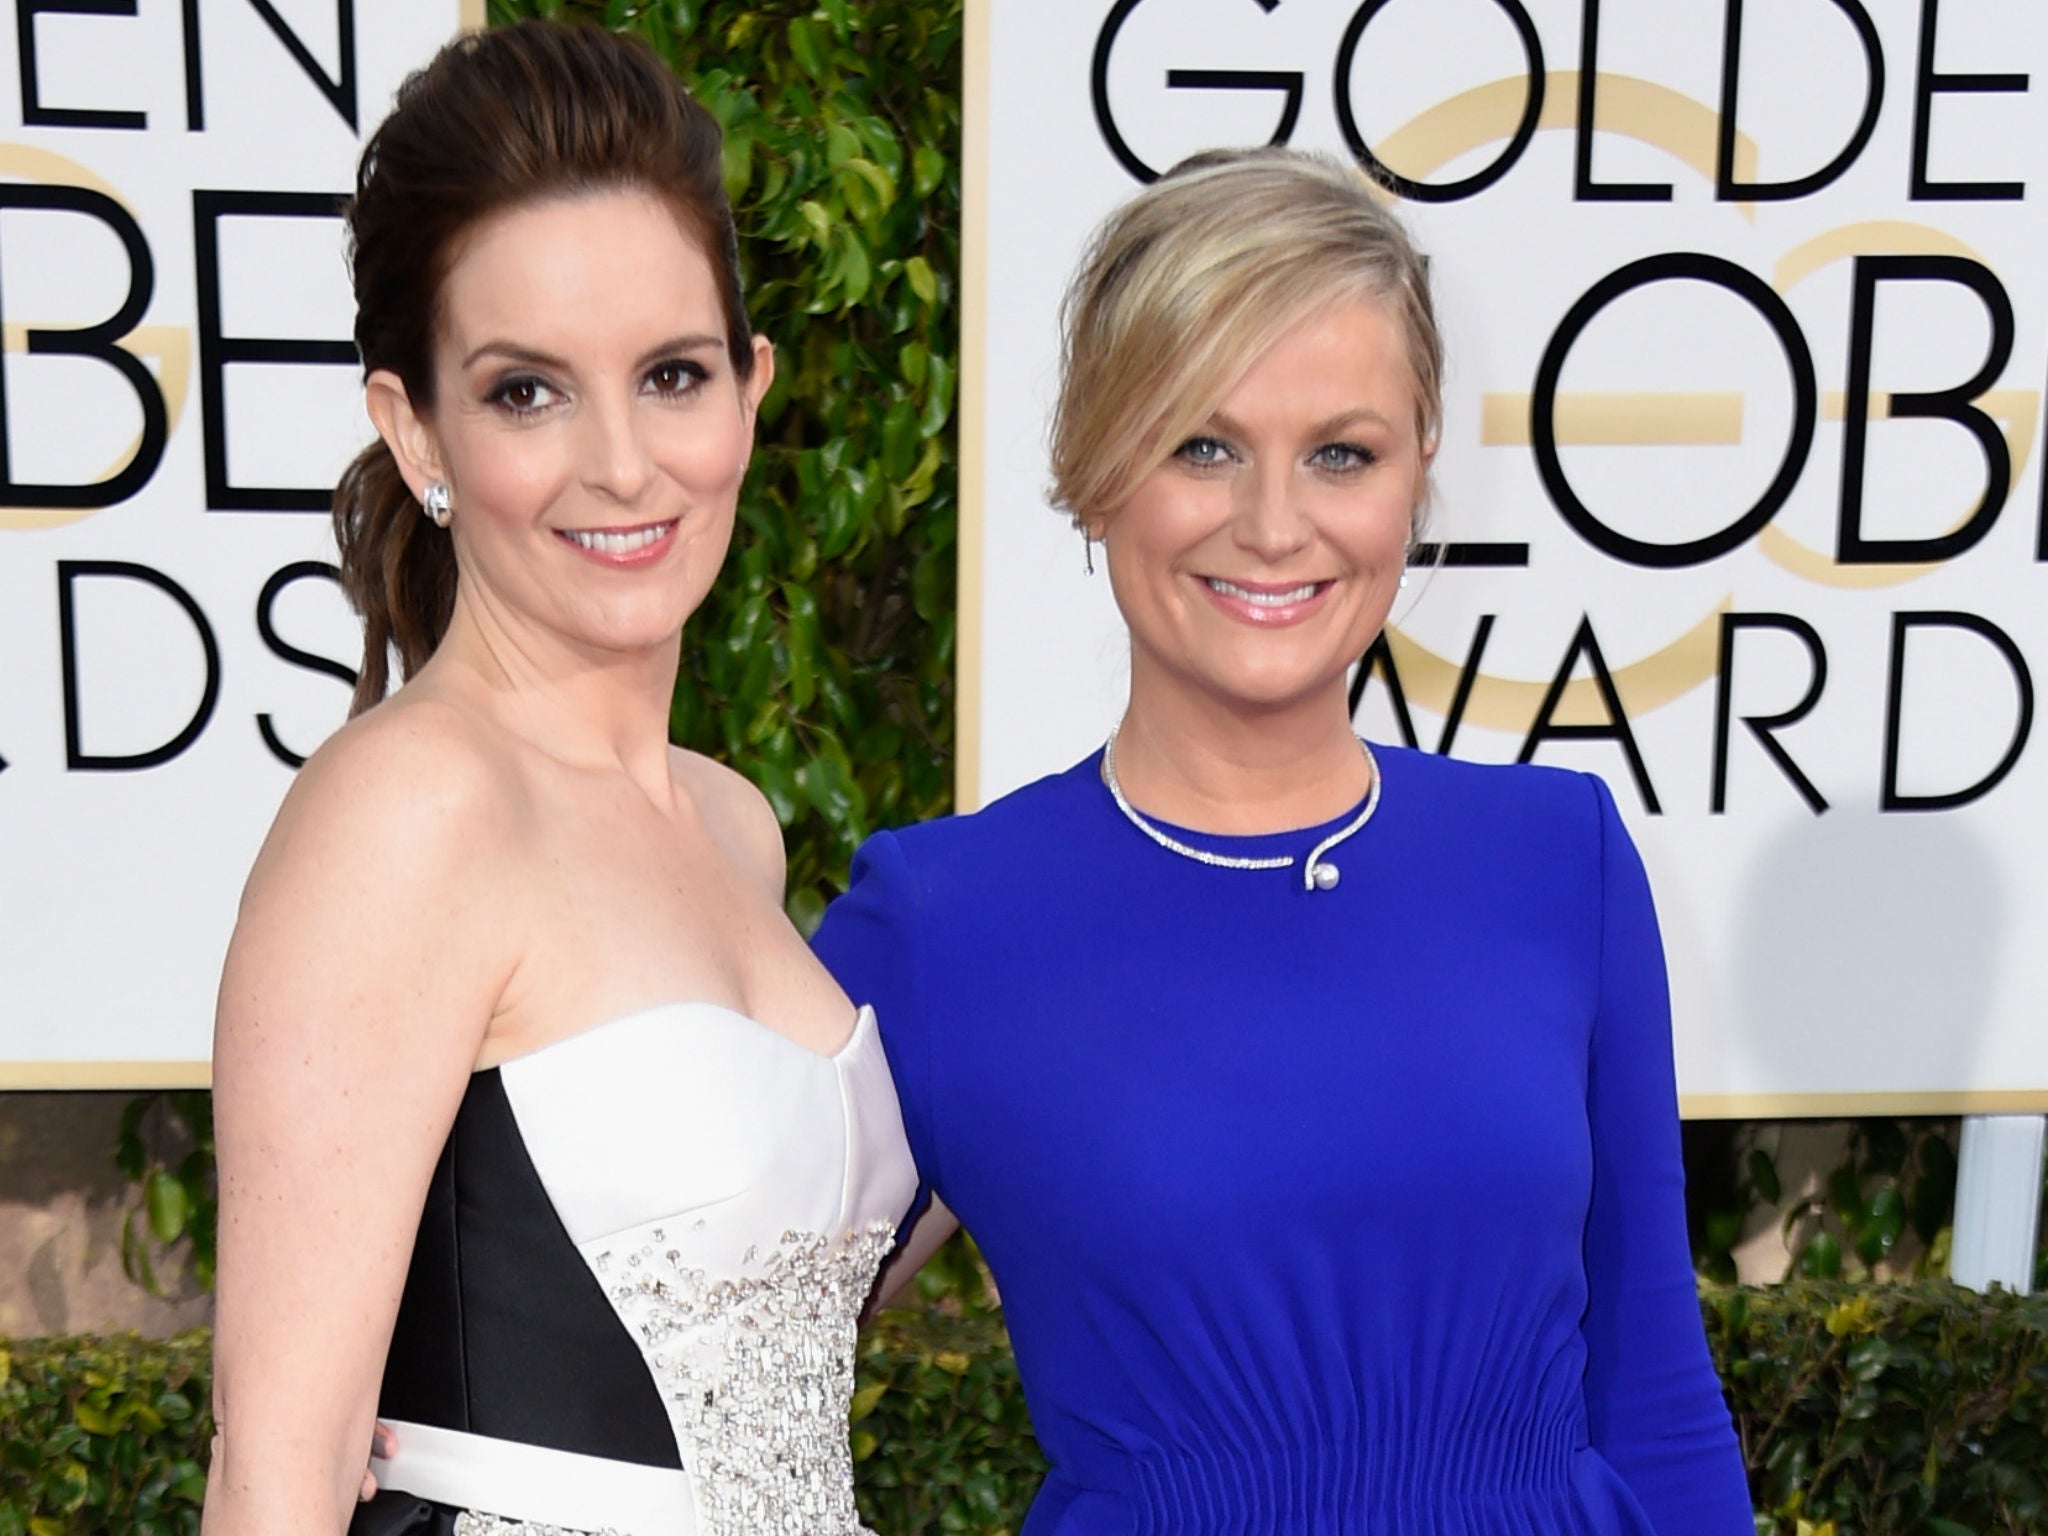 Fey and Poehler have been friends since their twenties